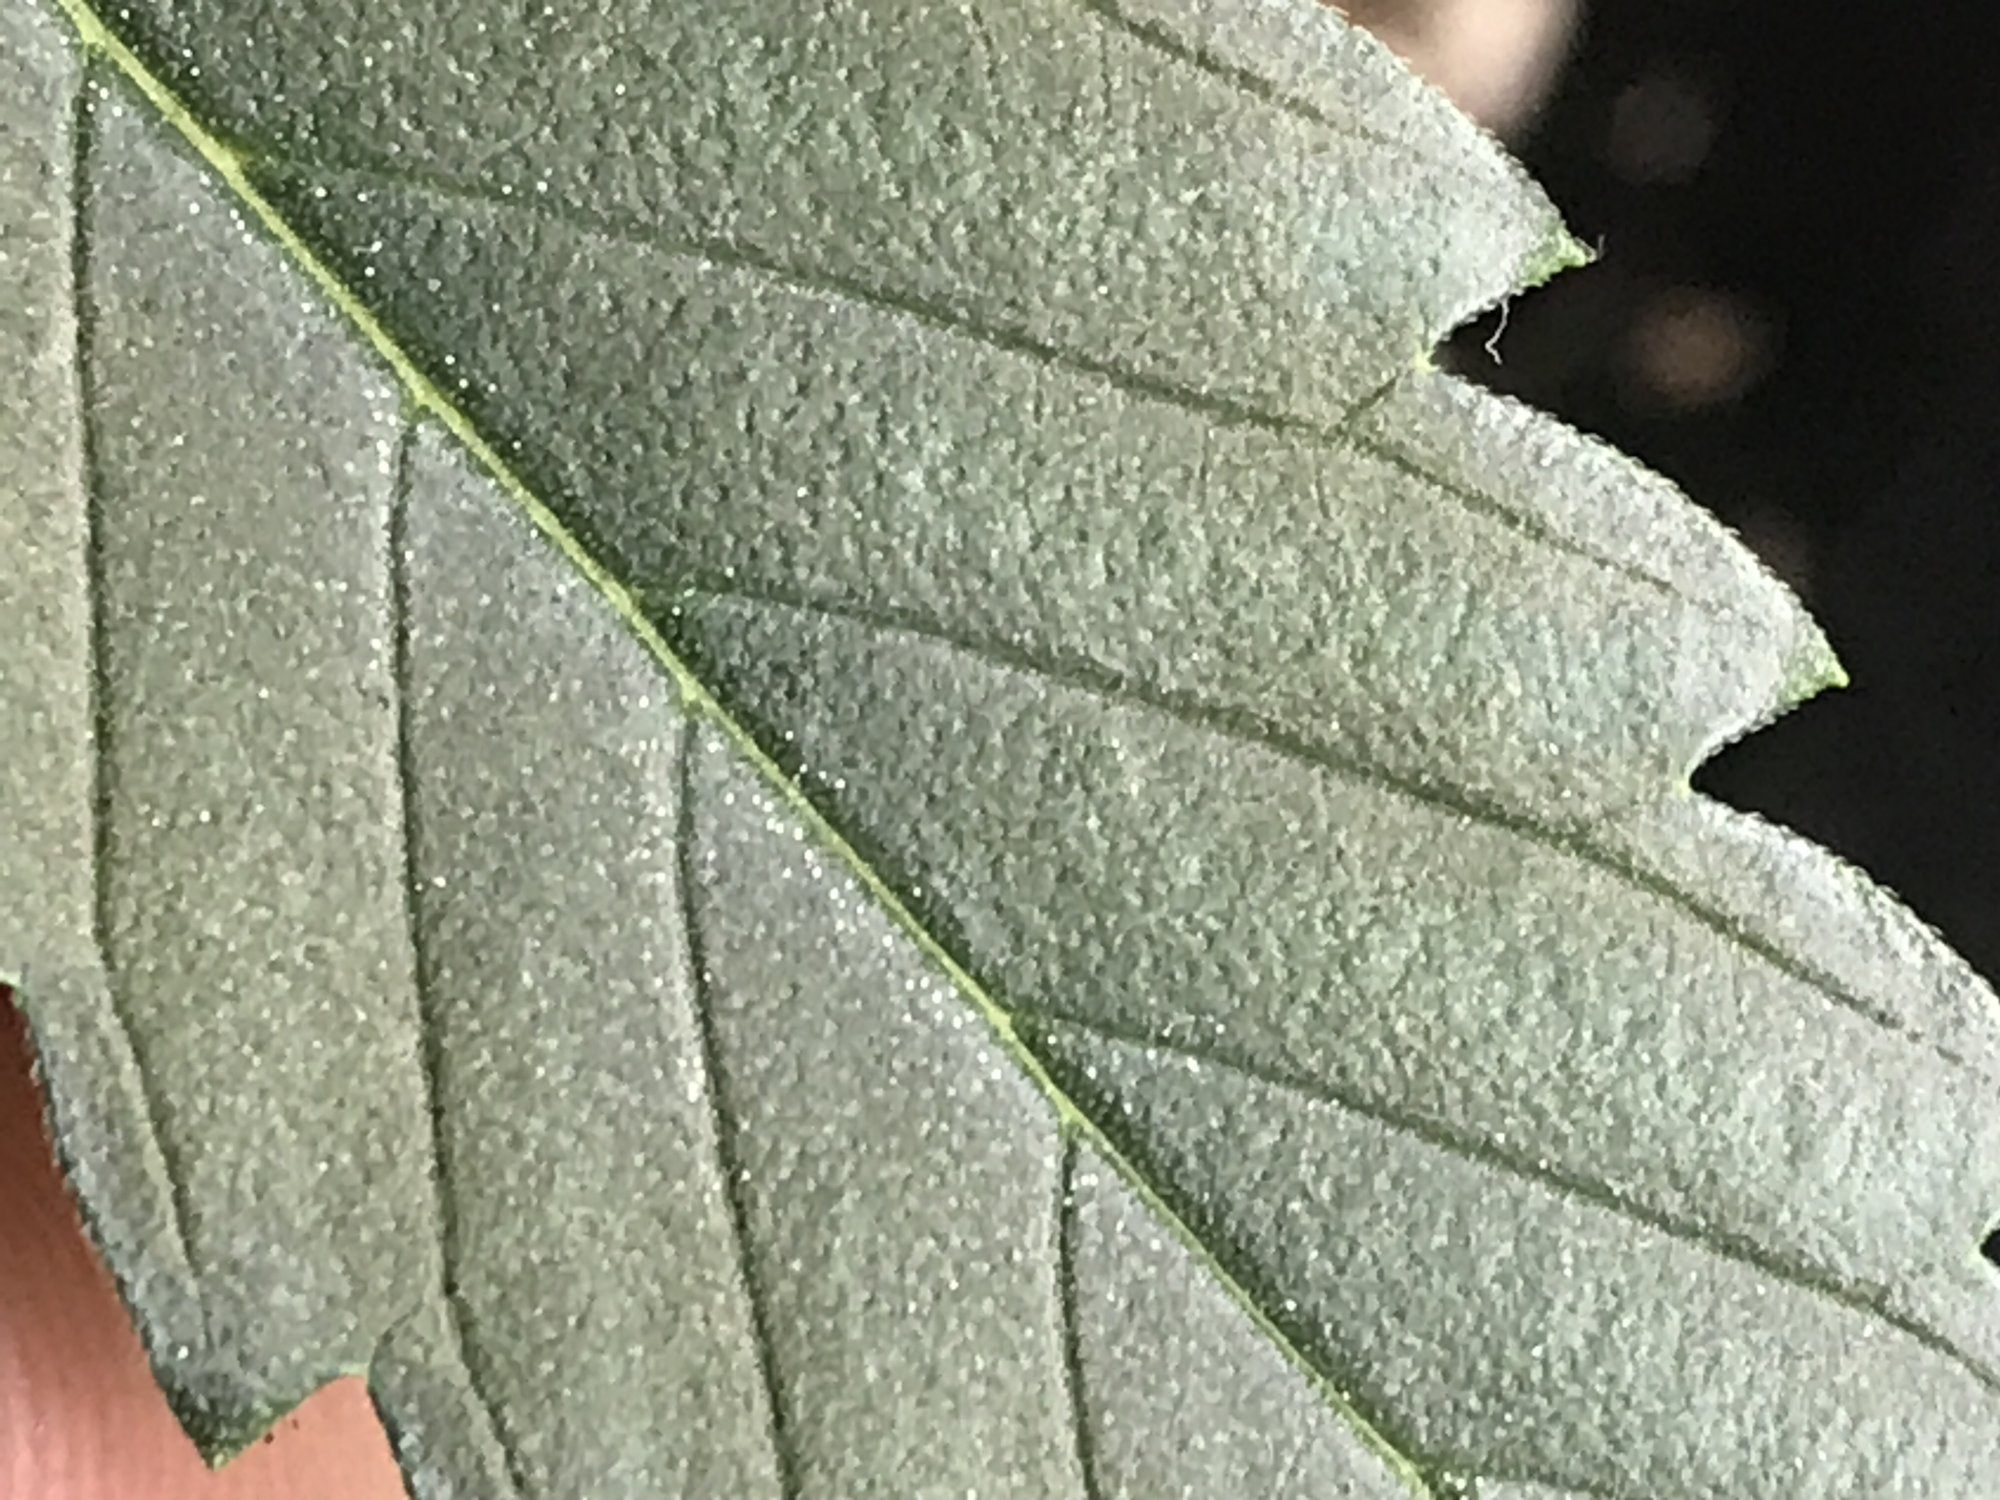 Identifying small white dots on cannabis leaves 2